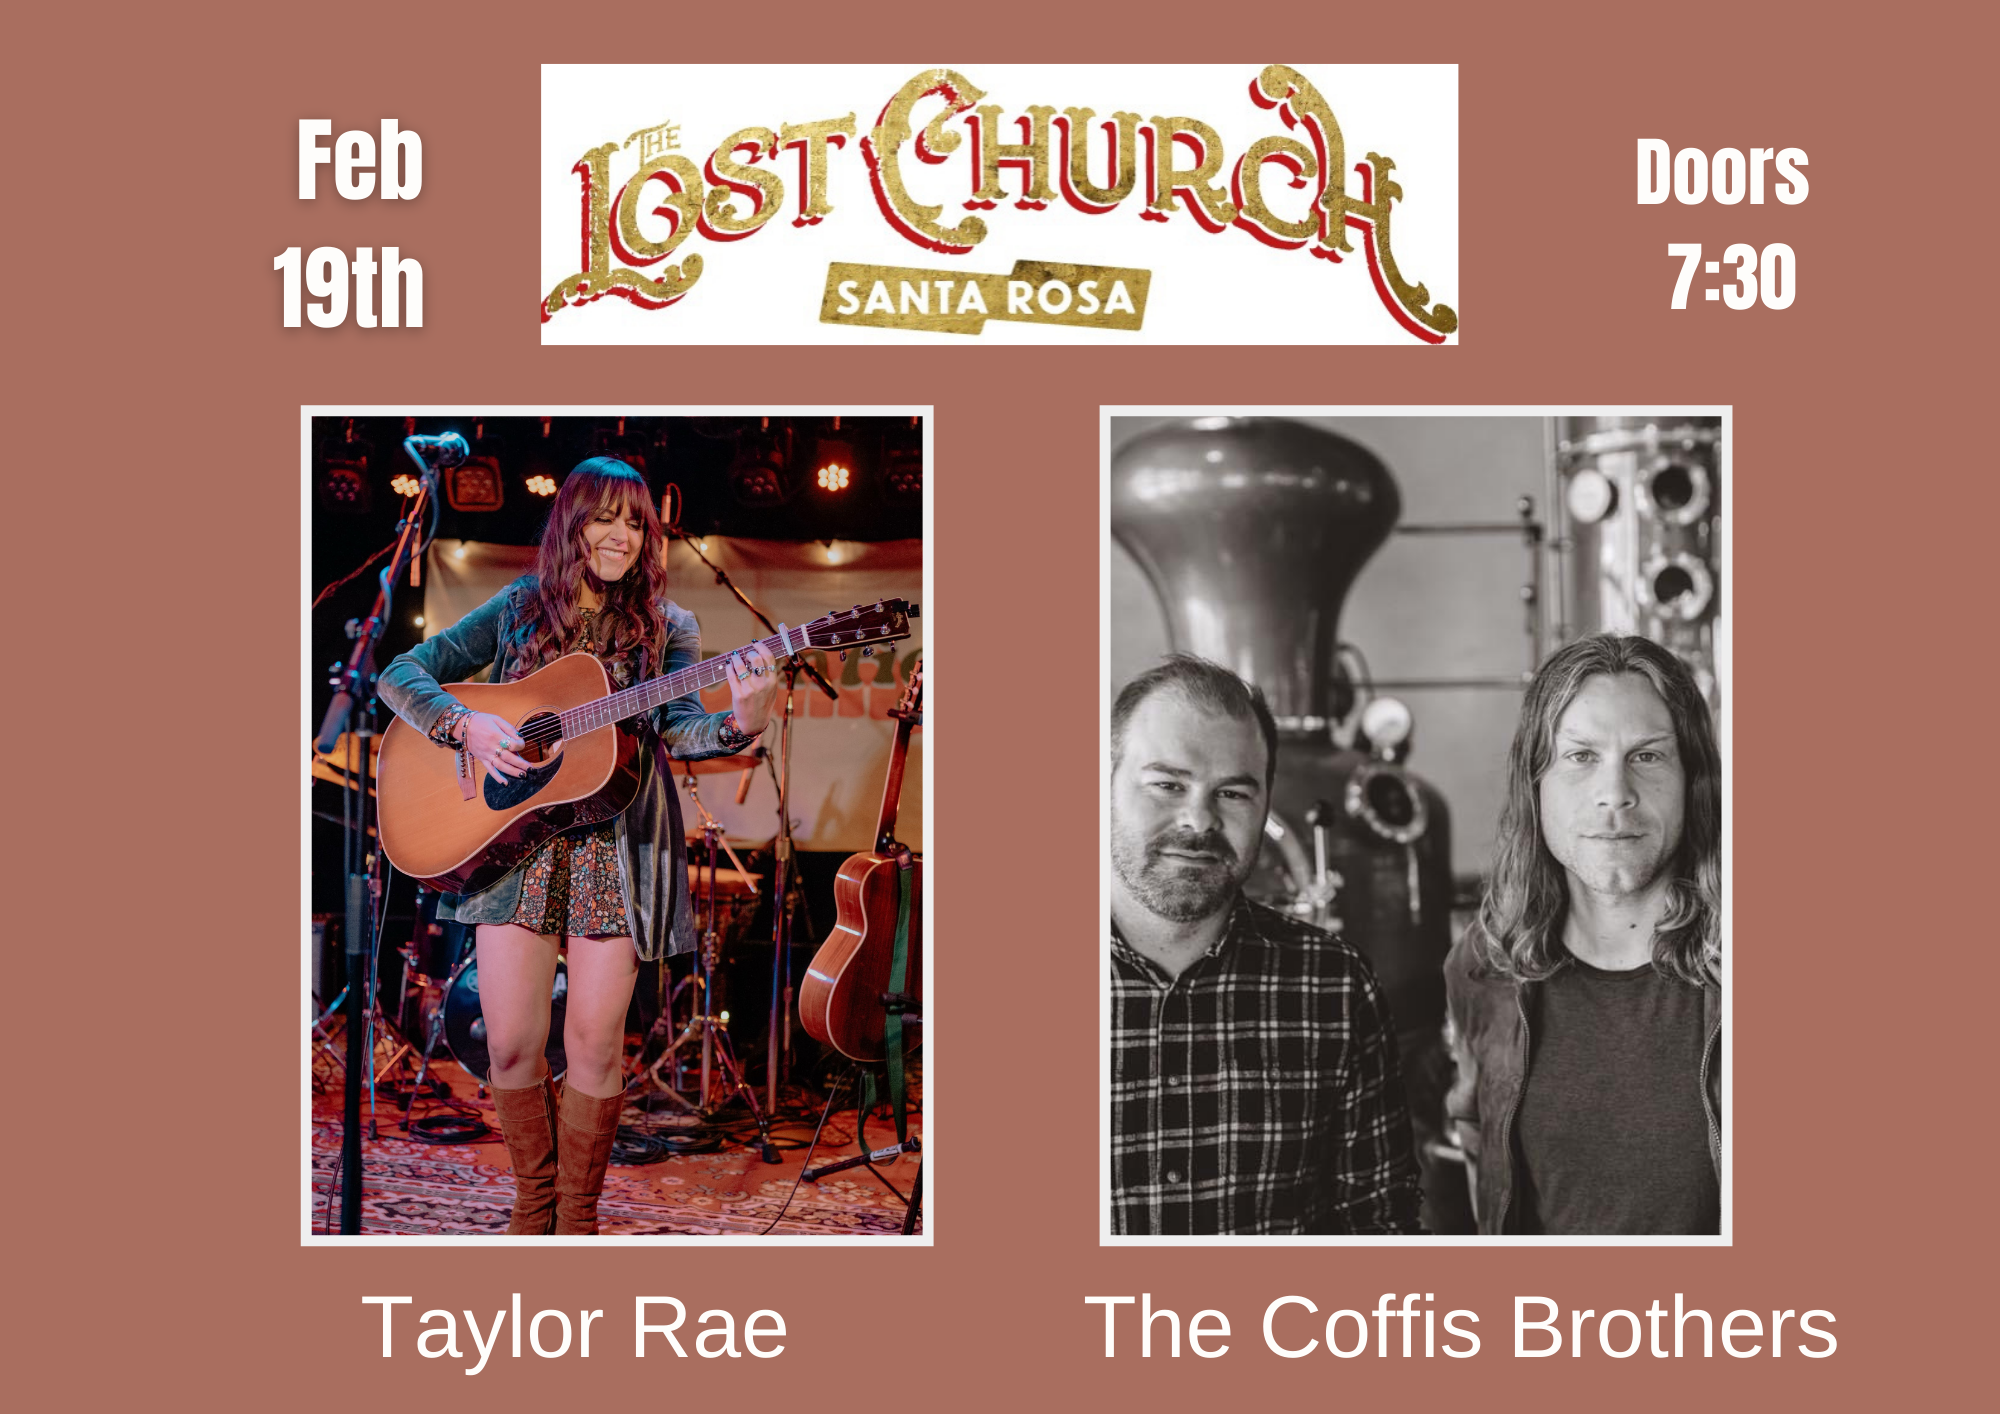 Taylor Rae and The Coffis Brothers